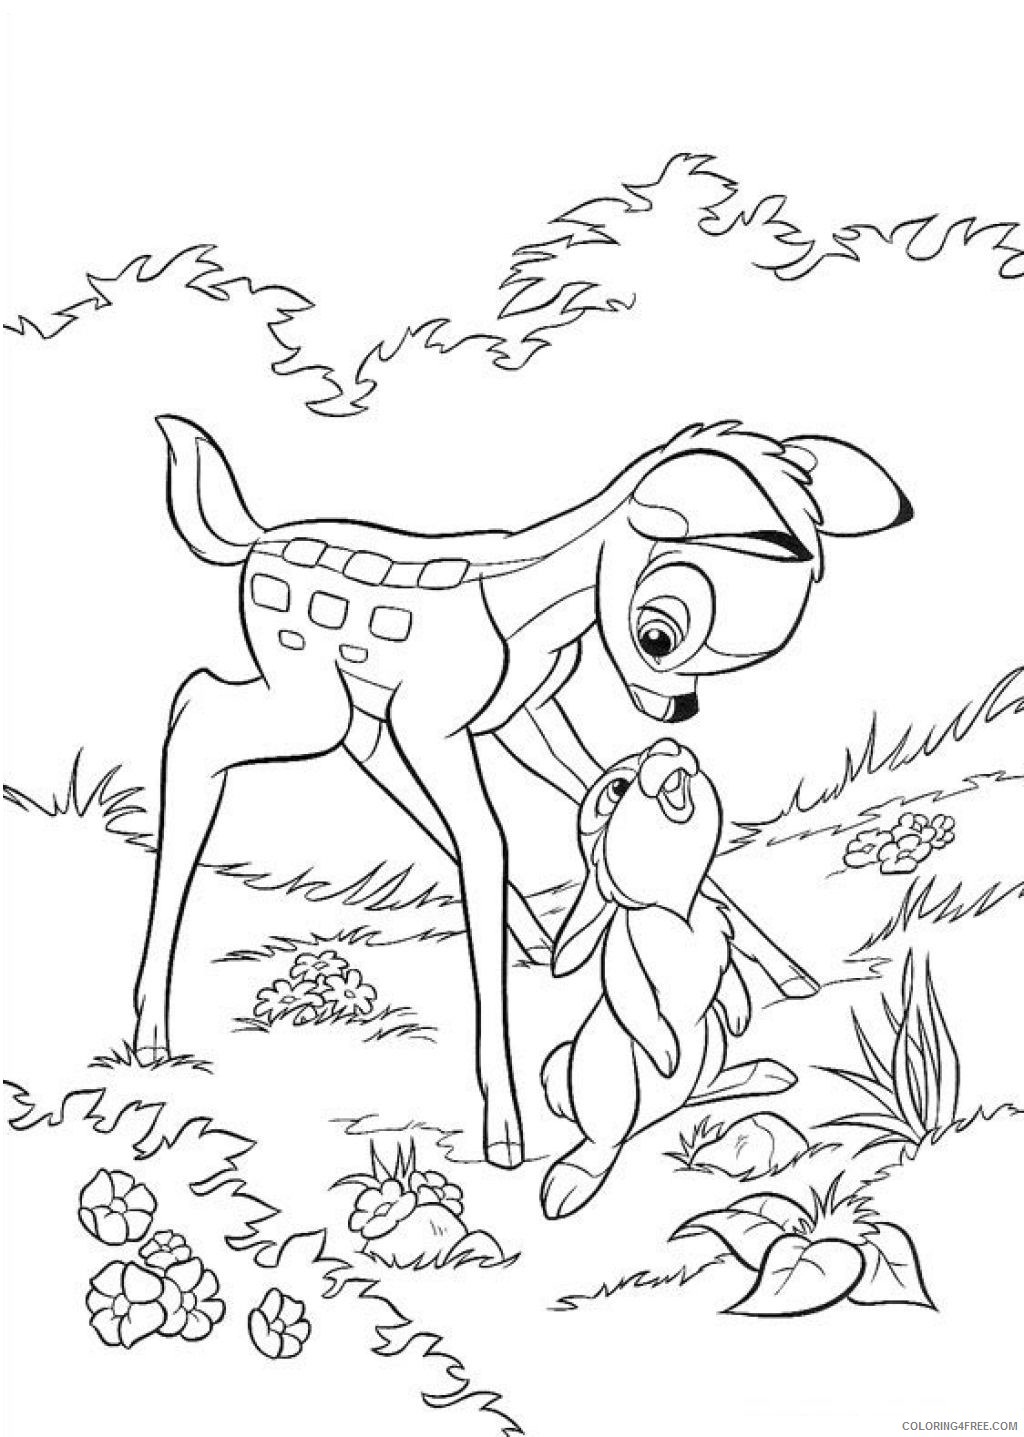 Bambi Coloring Pages Cartoons Bambi For Kids 2 Printable 2020 1005 Coloring4free